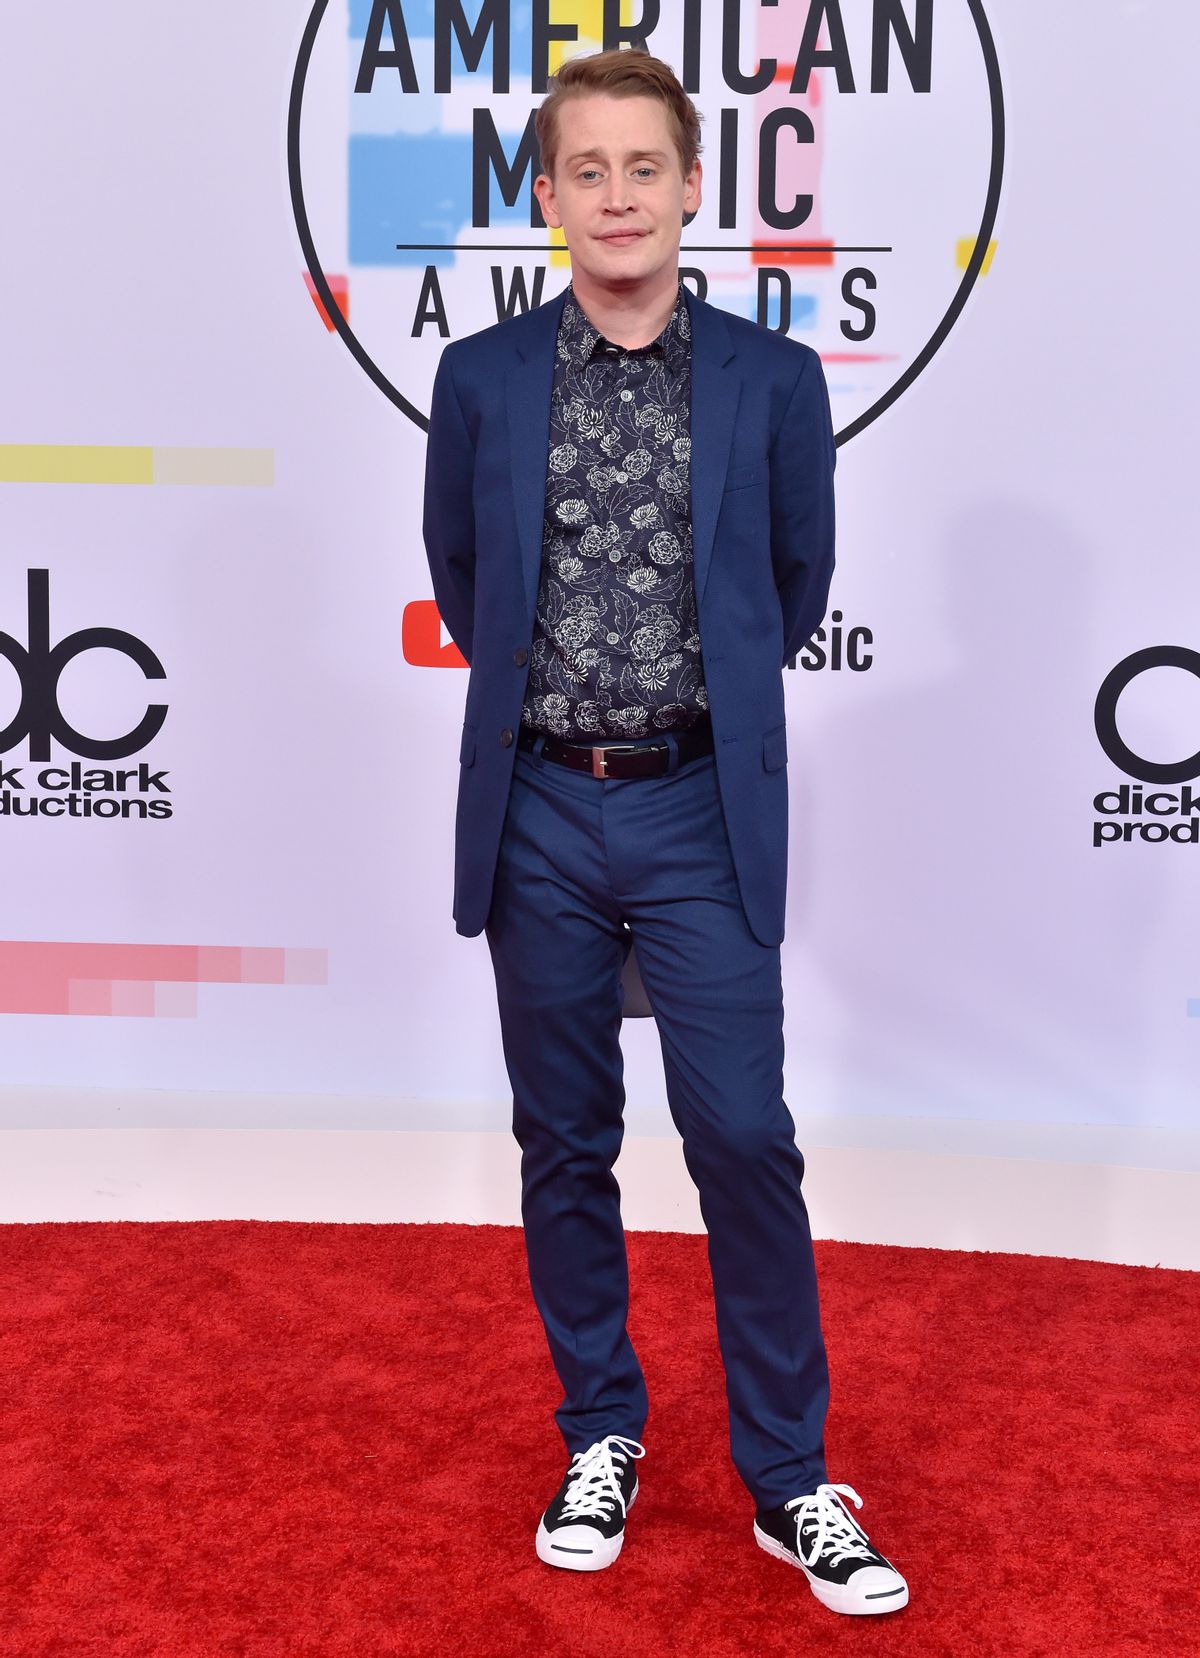 LOS ANGELES, CA - OCTOBER 09:  Macaulay Culkin attends the 2018 American Music Awards at Microsoft Theater on October 9, 2018 in Los Angeles, California.  (Photo by Axelle/Bauer-Griffin/FilmMagic) (Axelle/Bauer-Griffin/FilmMagic)